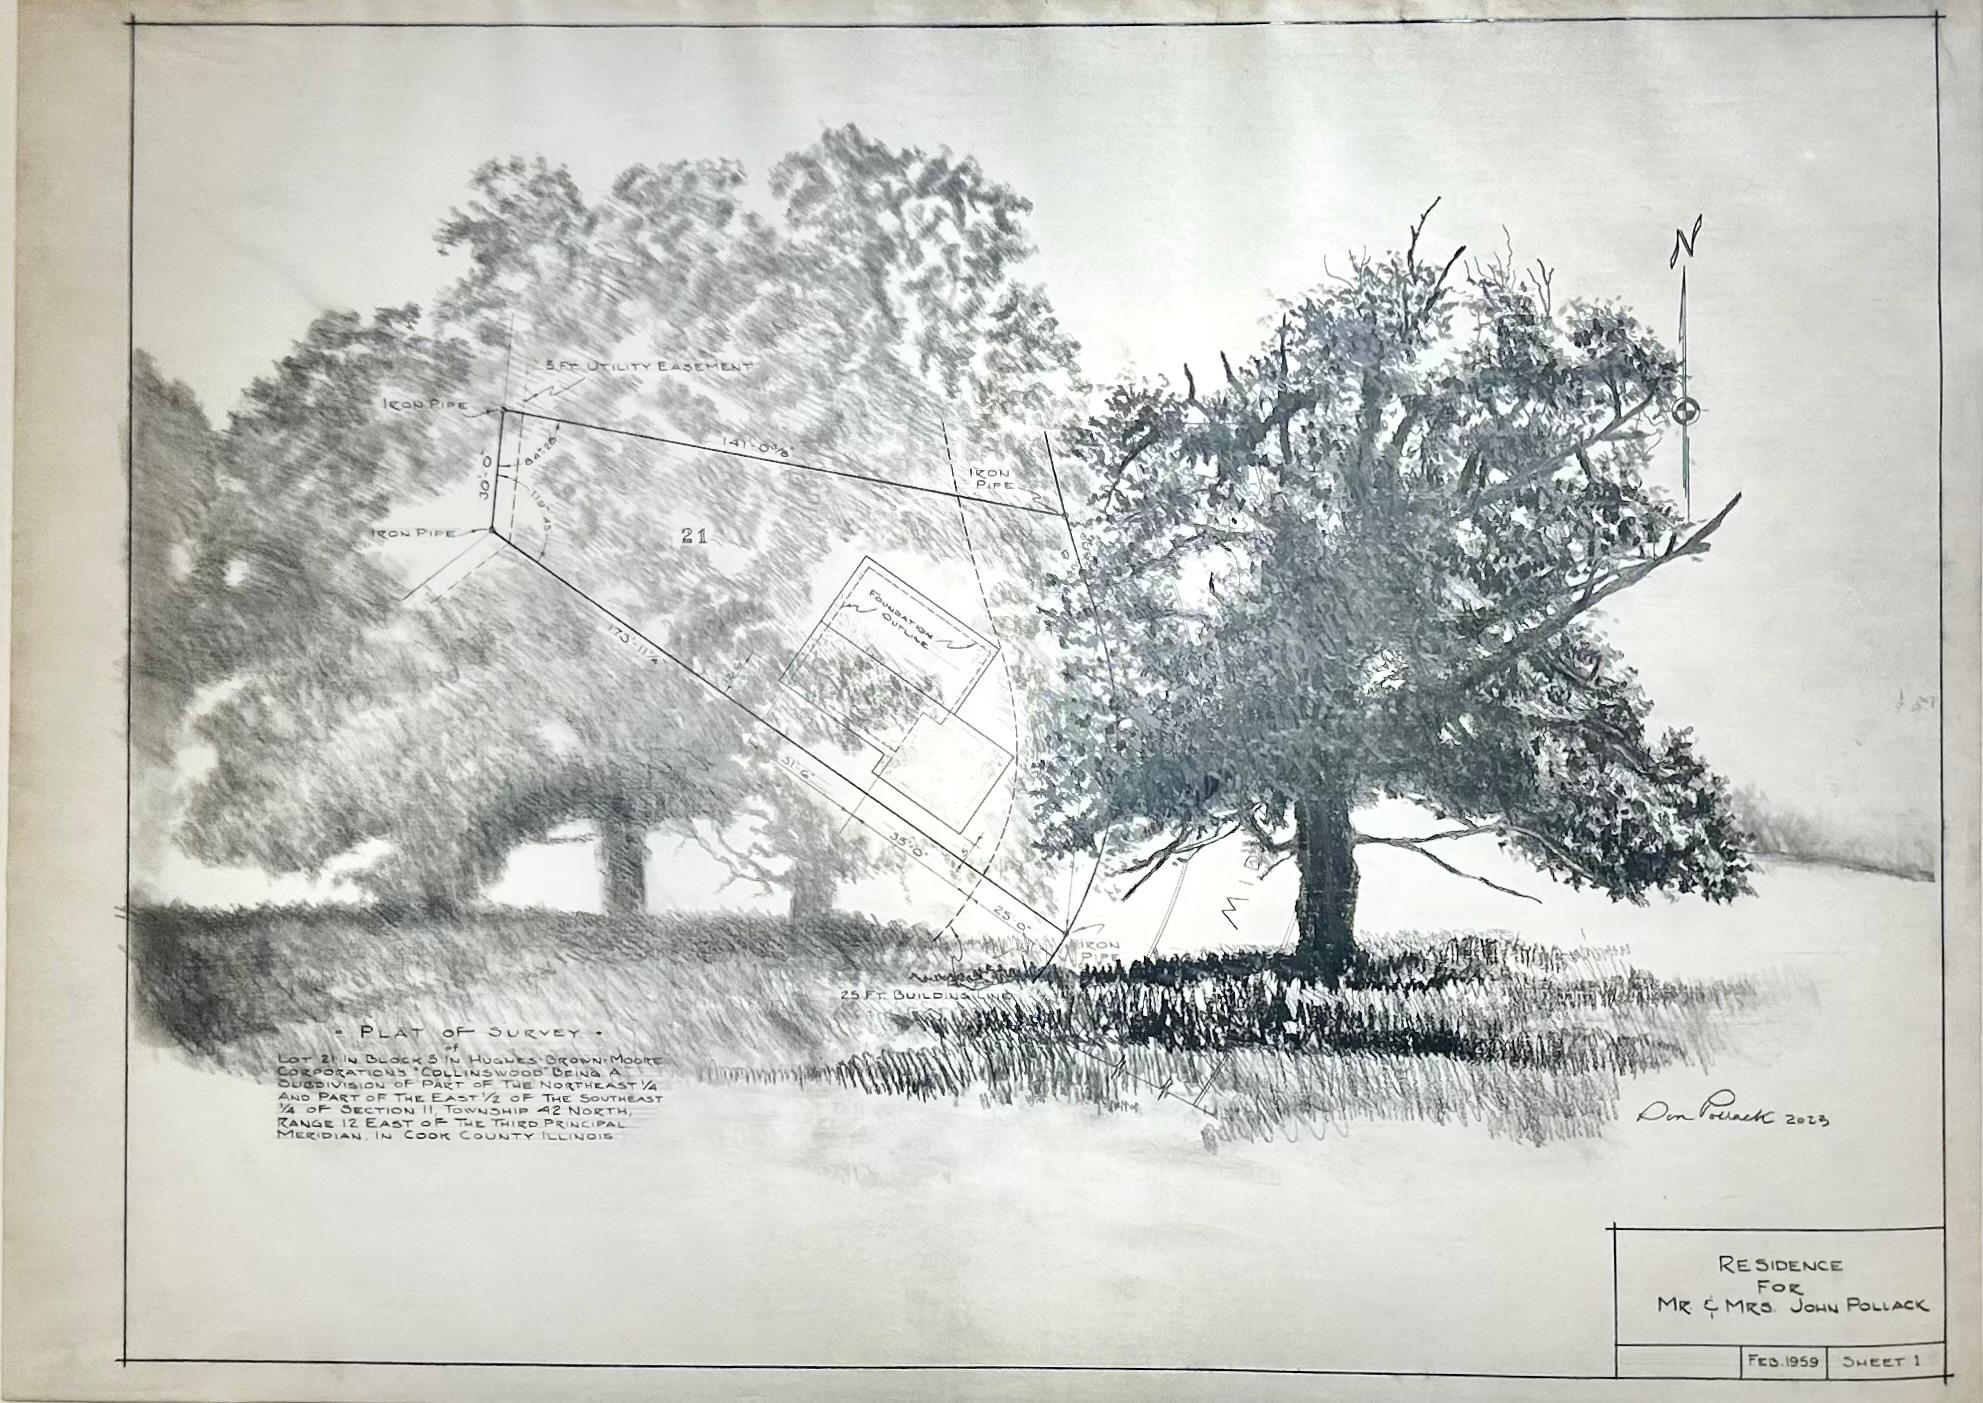 Plat Survey - Trees in Graphite on Antique Architectural Drawings 